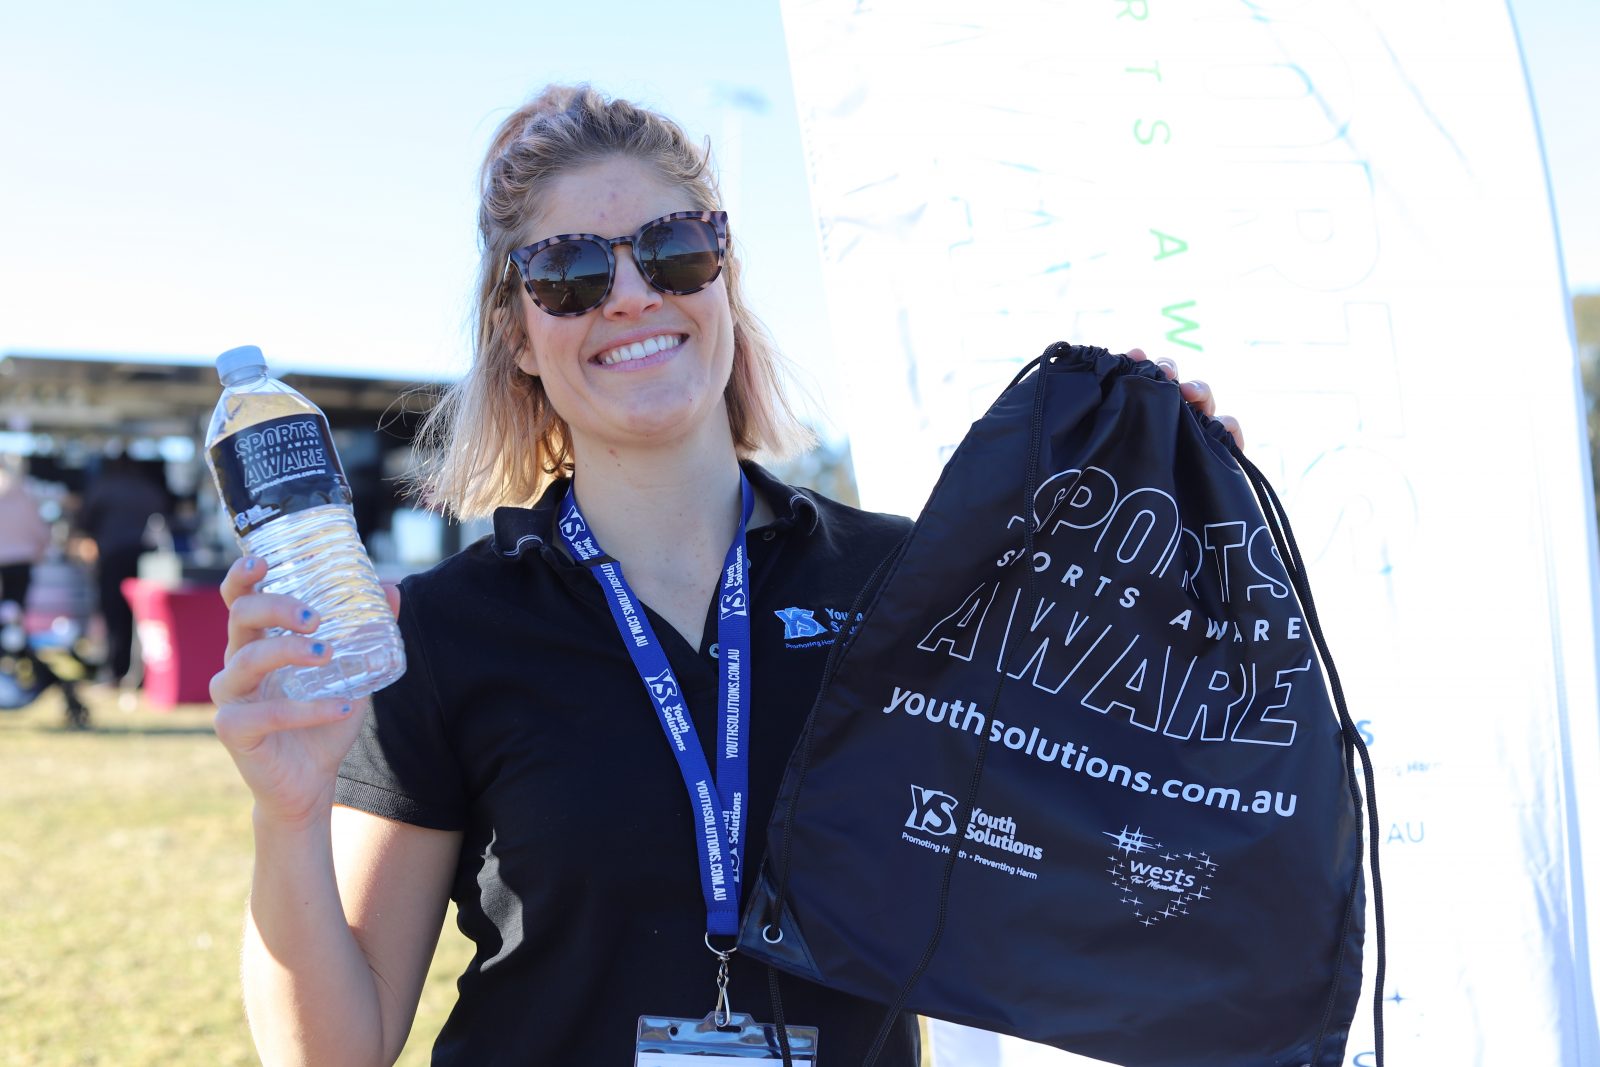 Youth Solutions Manager Emily Deans holds up a Sports AWARE drink bottle and drawstring bag outside at a Sports AWARE outreach activity.